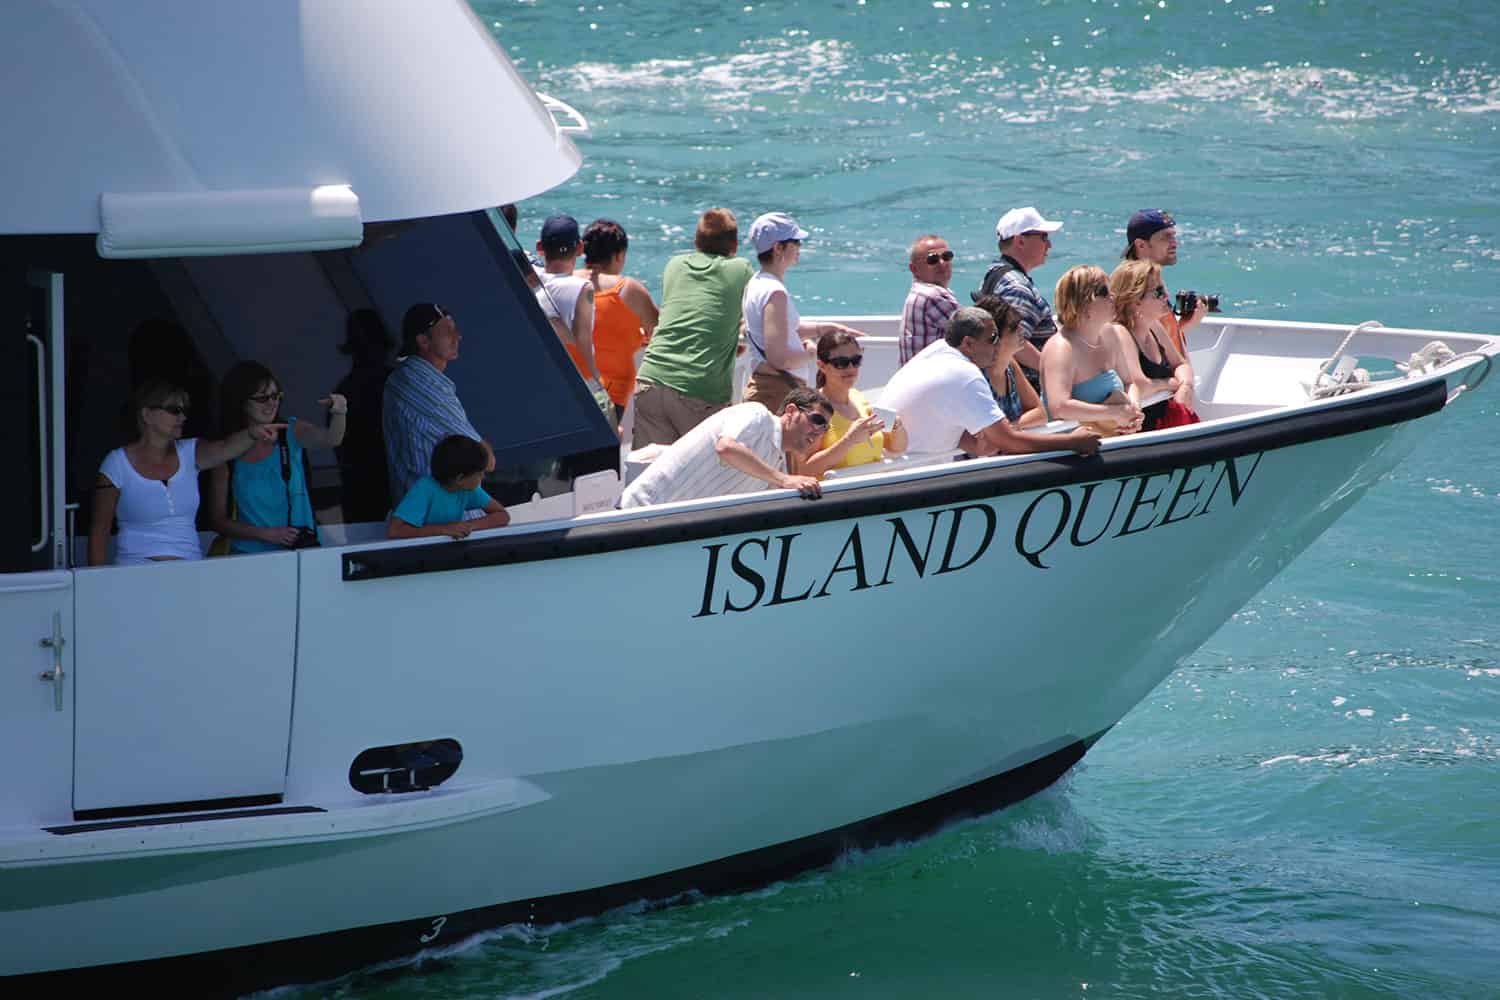 Combo-Miami-City-Tour-and-Biscayne-Boat-Cruise-with-Transportation-by-Gray-Line-Miami